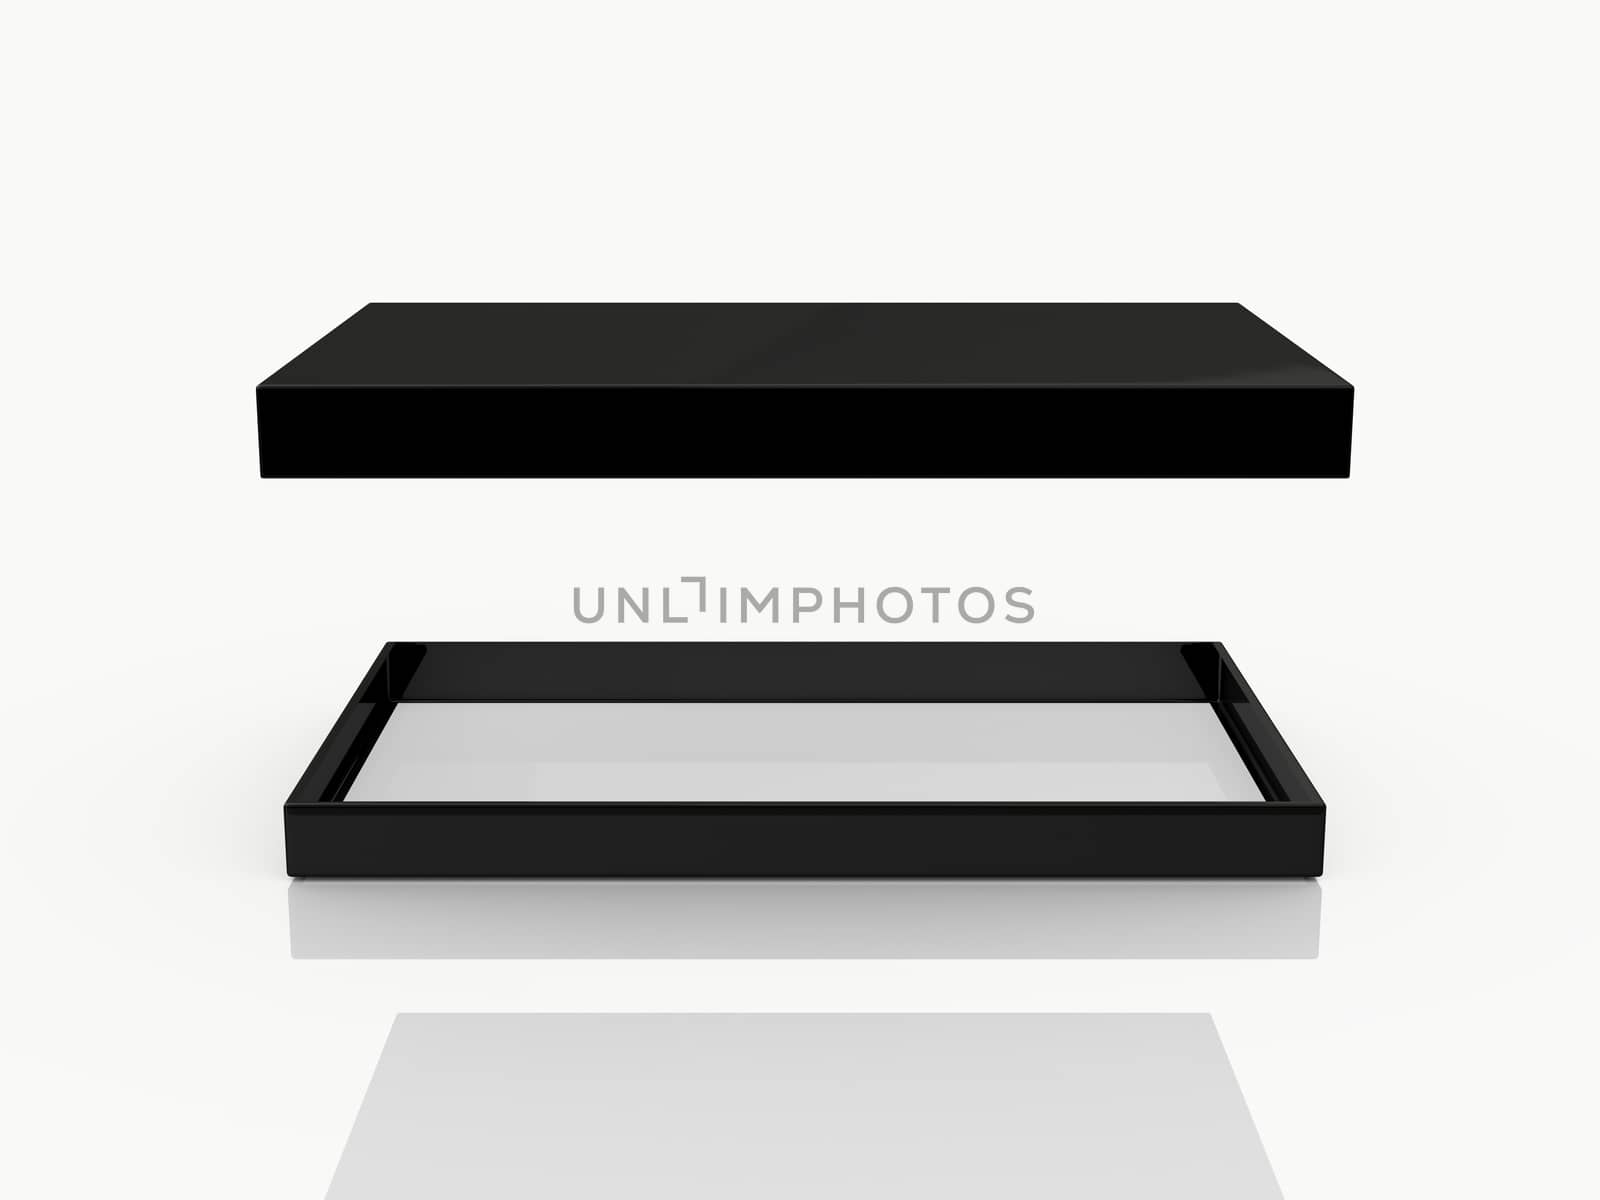 Black elegant empty open box and cover, side view, isolated on white background.